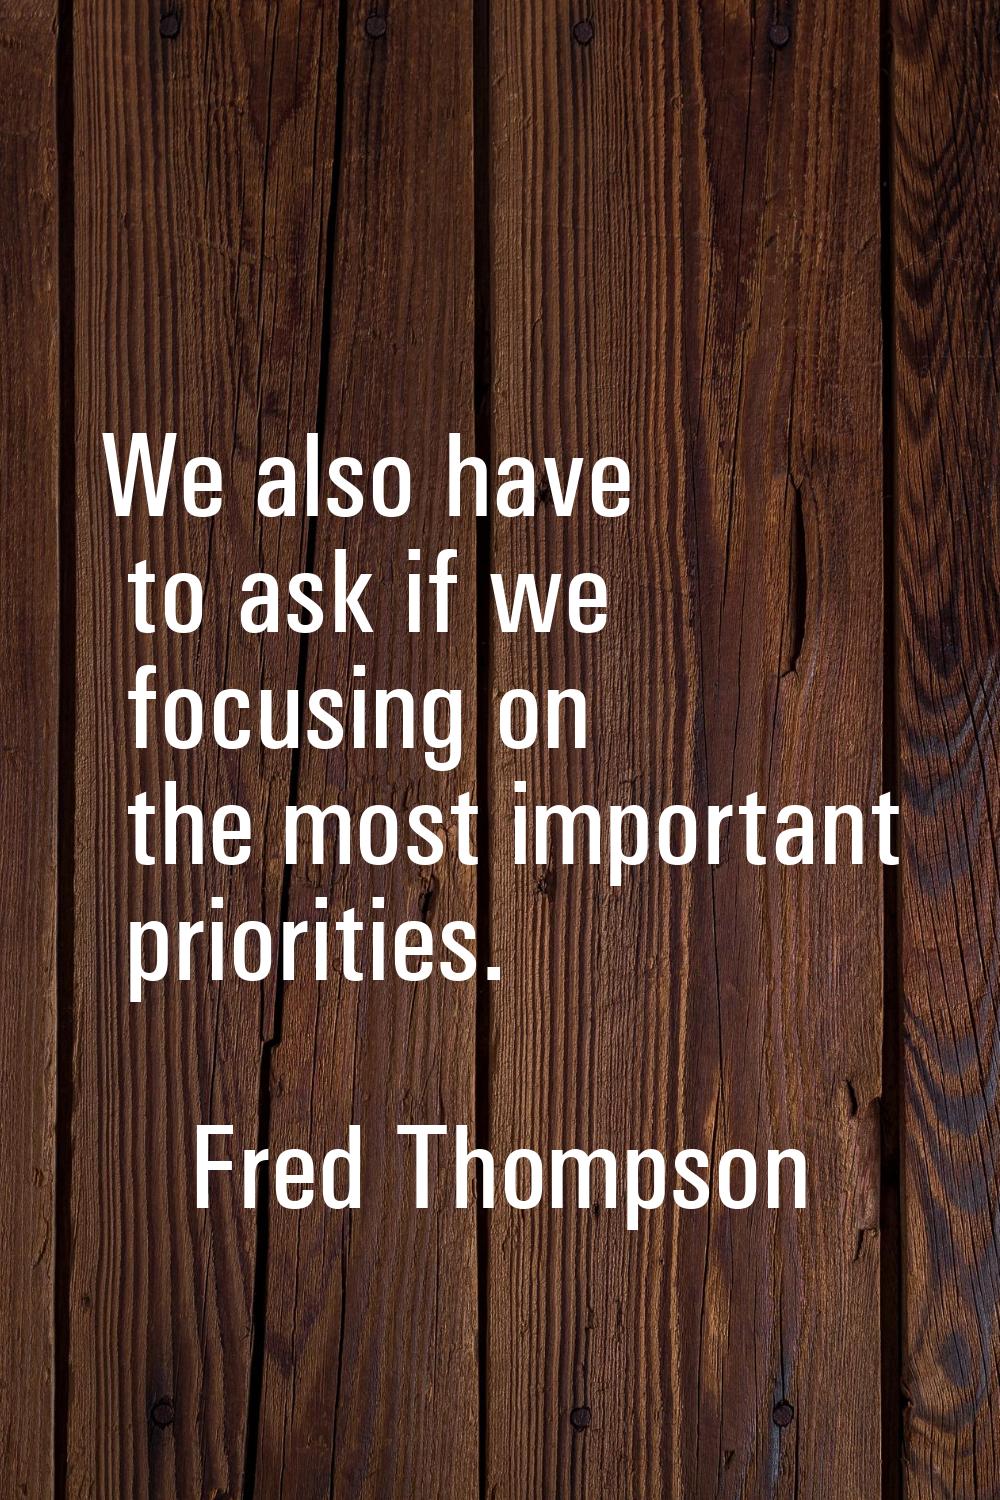 We also have to ask if we focusing on the most important priorities.